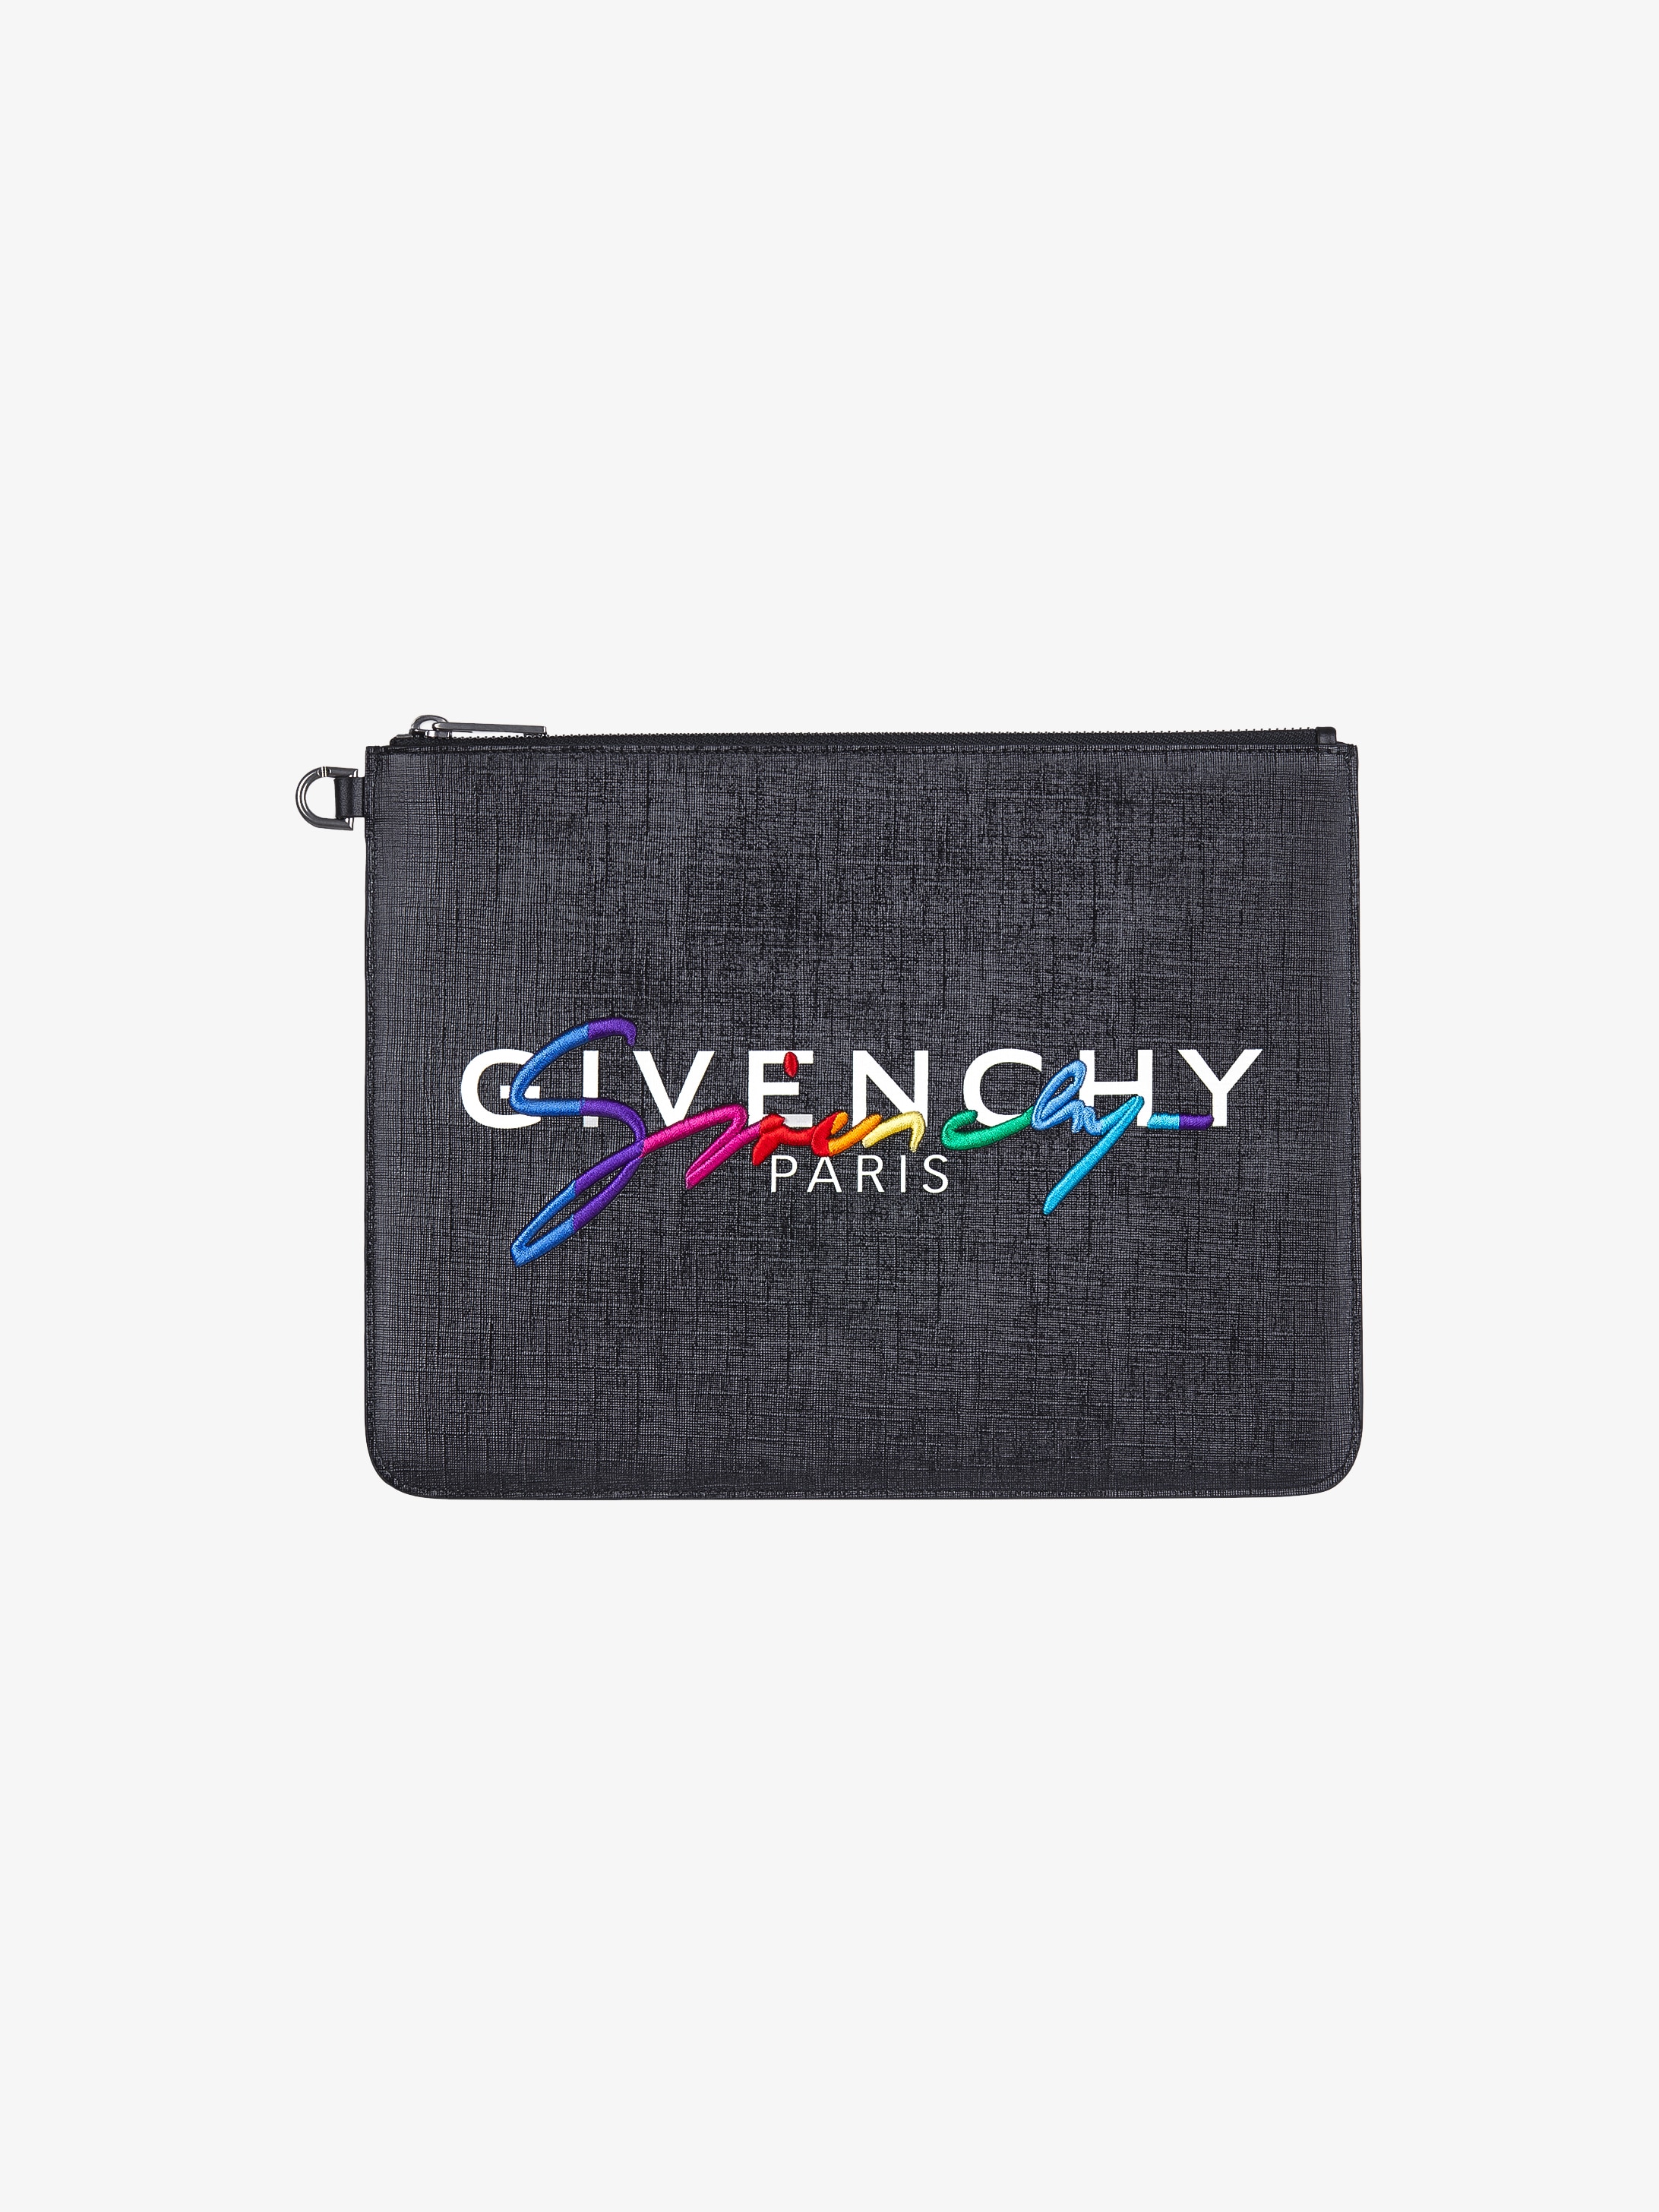 GIVENCHY large pouch | GIVENCHY Paris